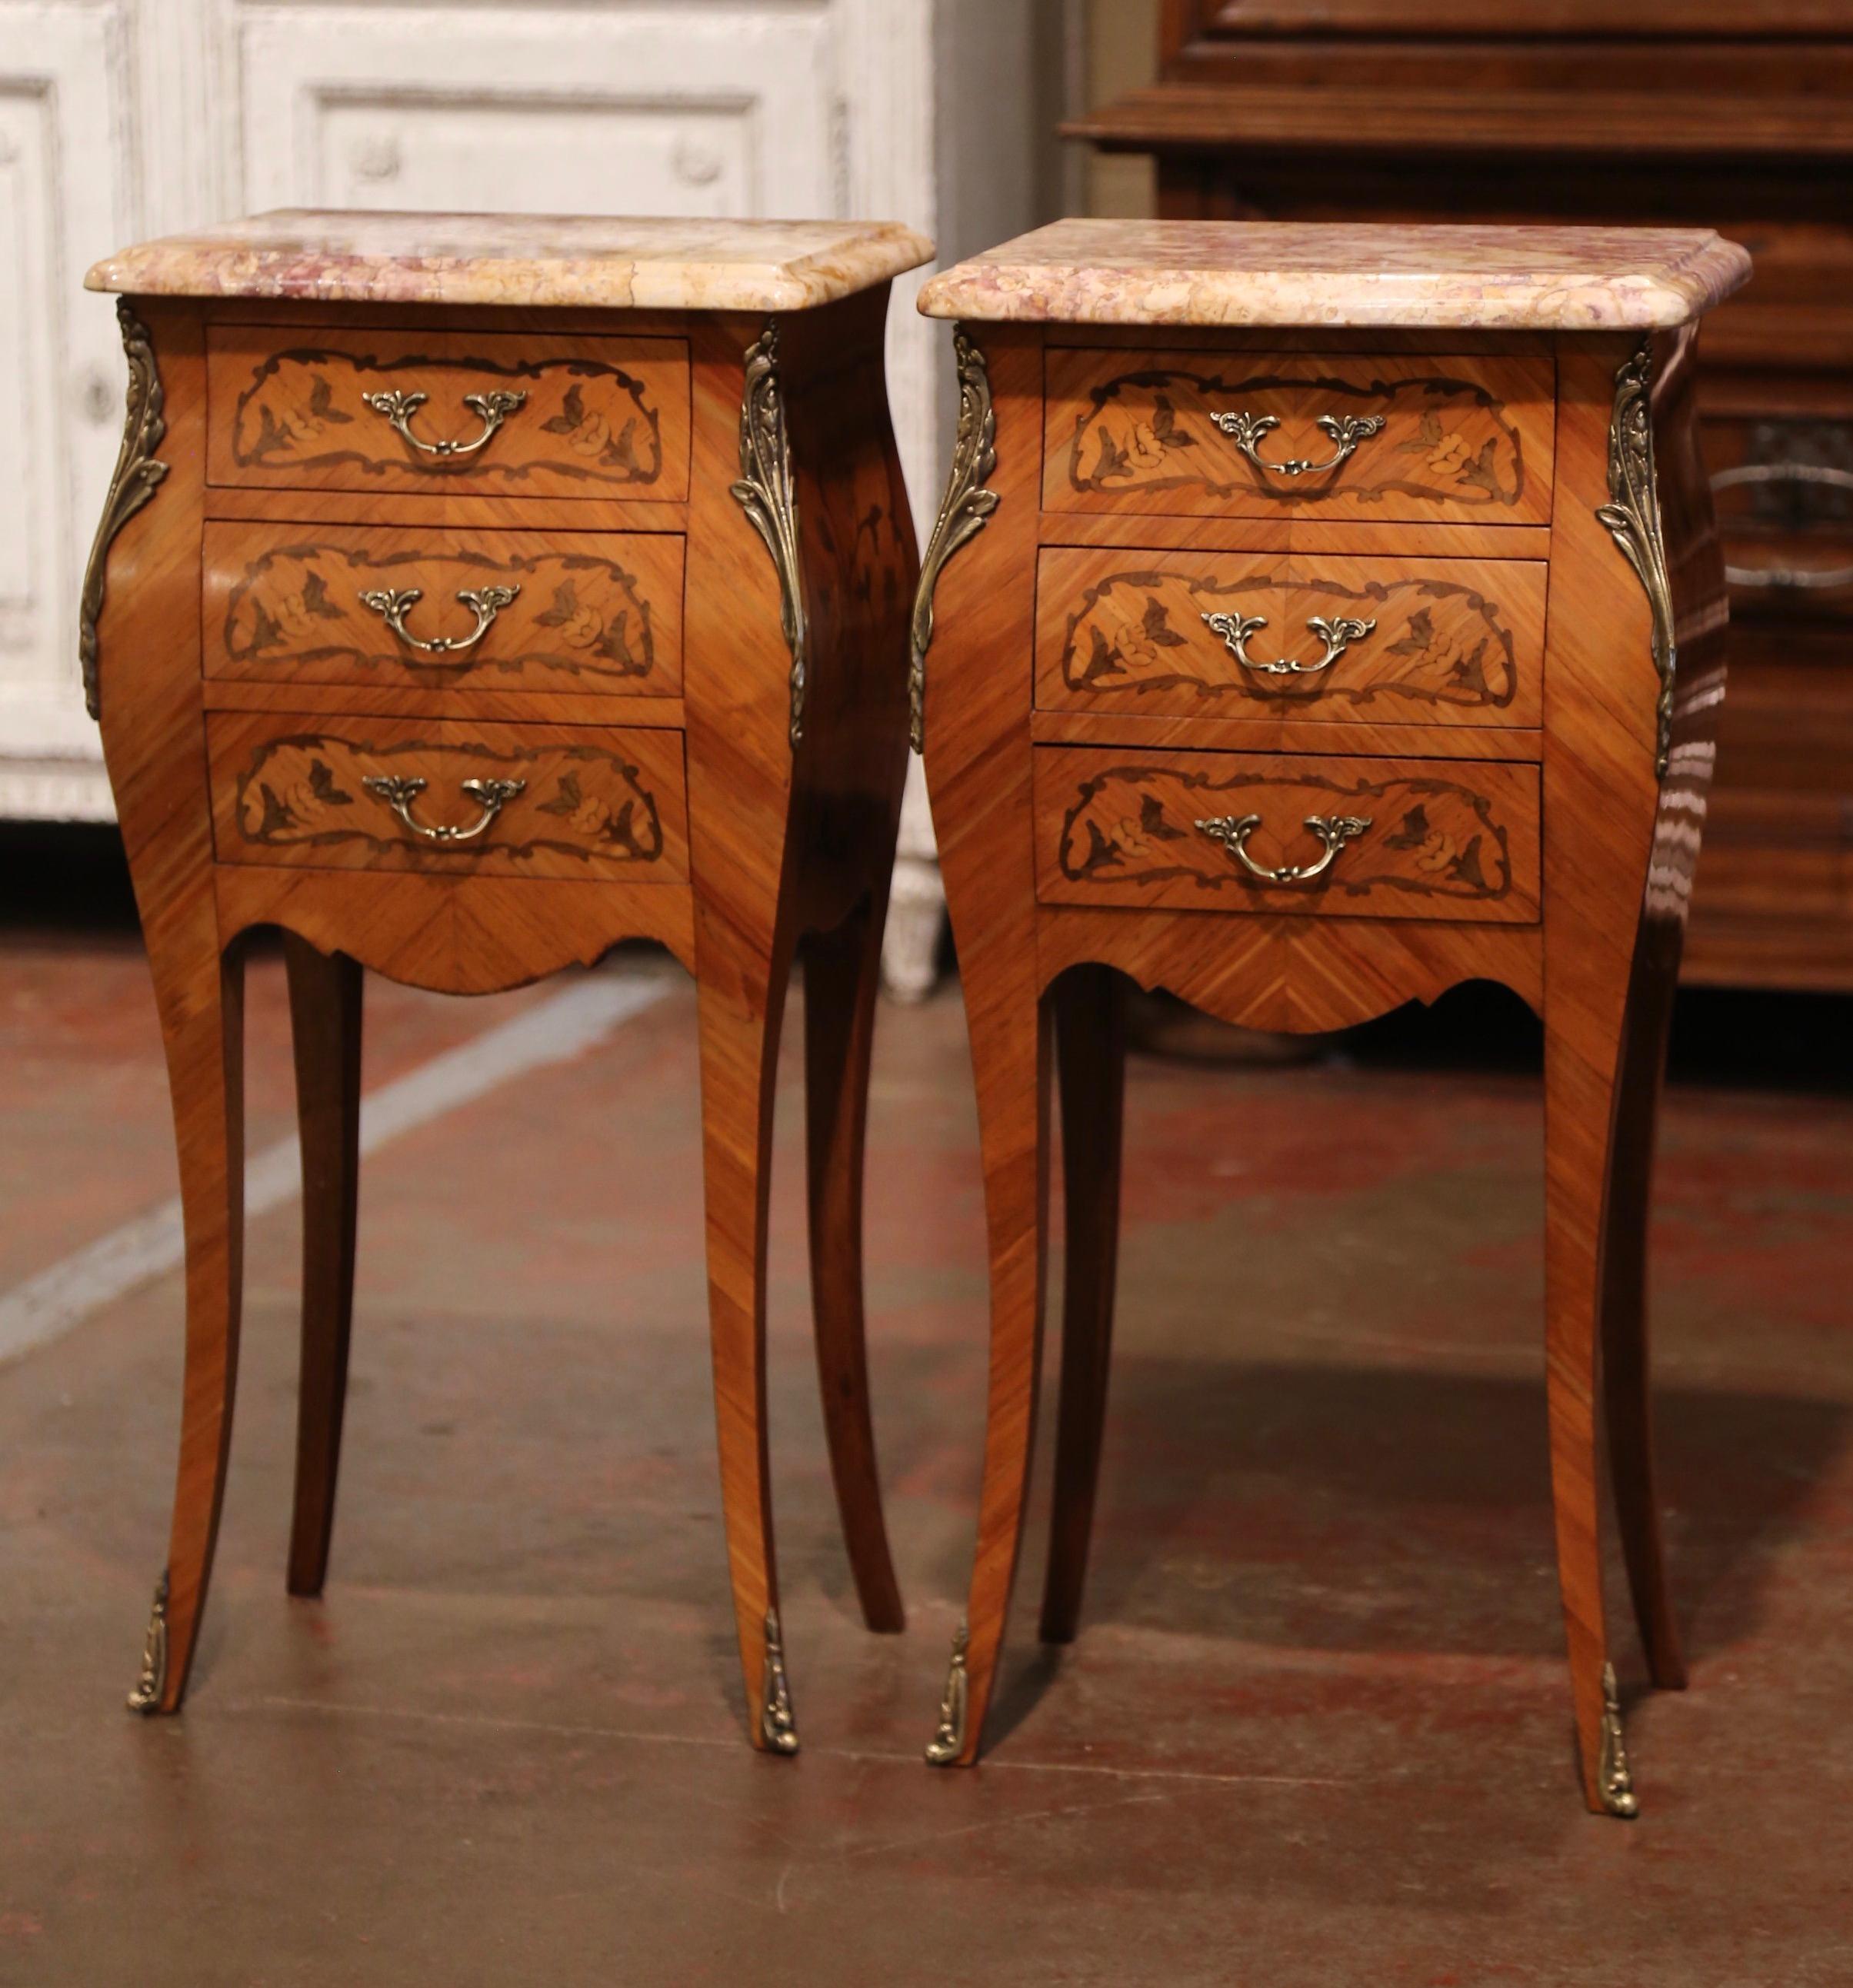 These elegant nightstands were created in France, circa 1970. Bombe in shape on all three sides, each mahogany cabinet stands on cabriole legs ending with gilt metal mounts, over a scalloped apron. Both curved sides are decorated with inlaid floral